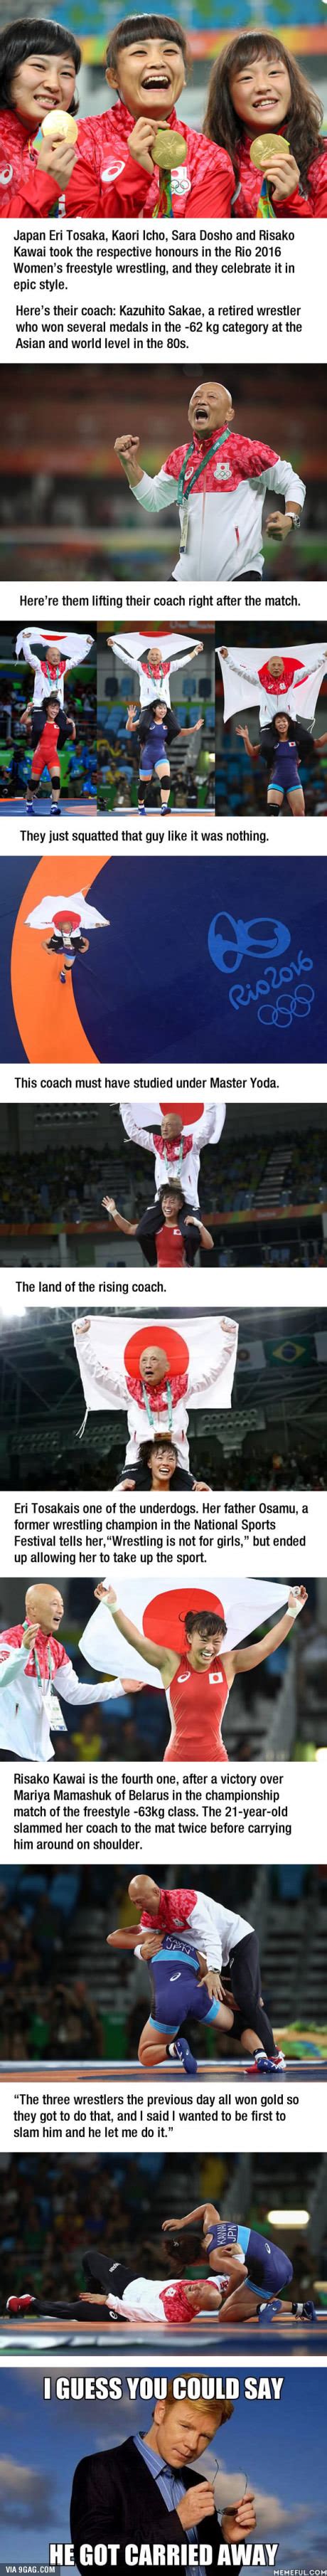 Japanese Wrestlers Bodyslam And Lift Their Coach To Celebrate Olympic